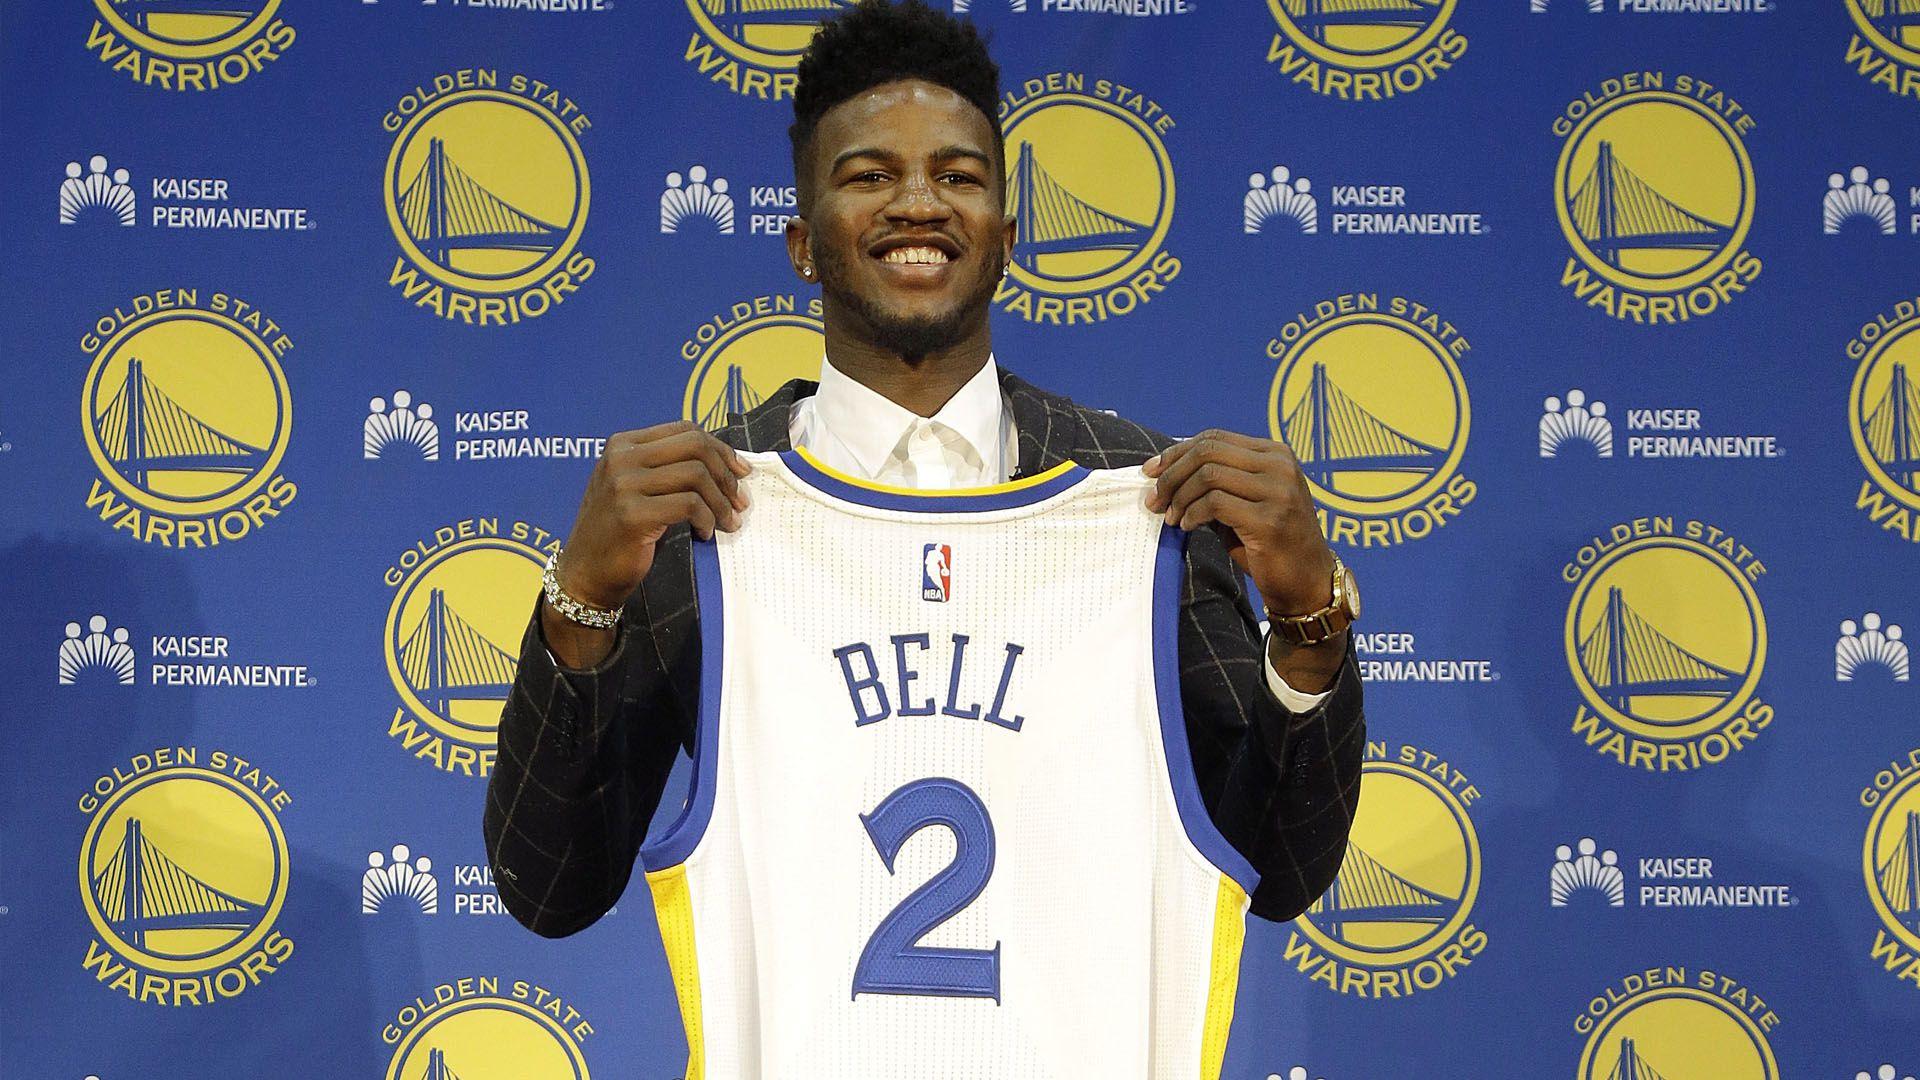 Jordan Bell is not Draymond Green but parallels are impossible to